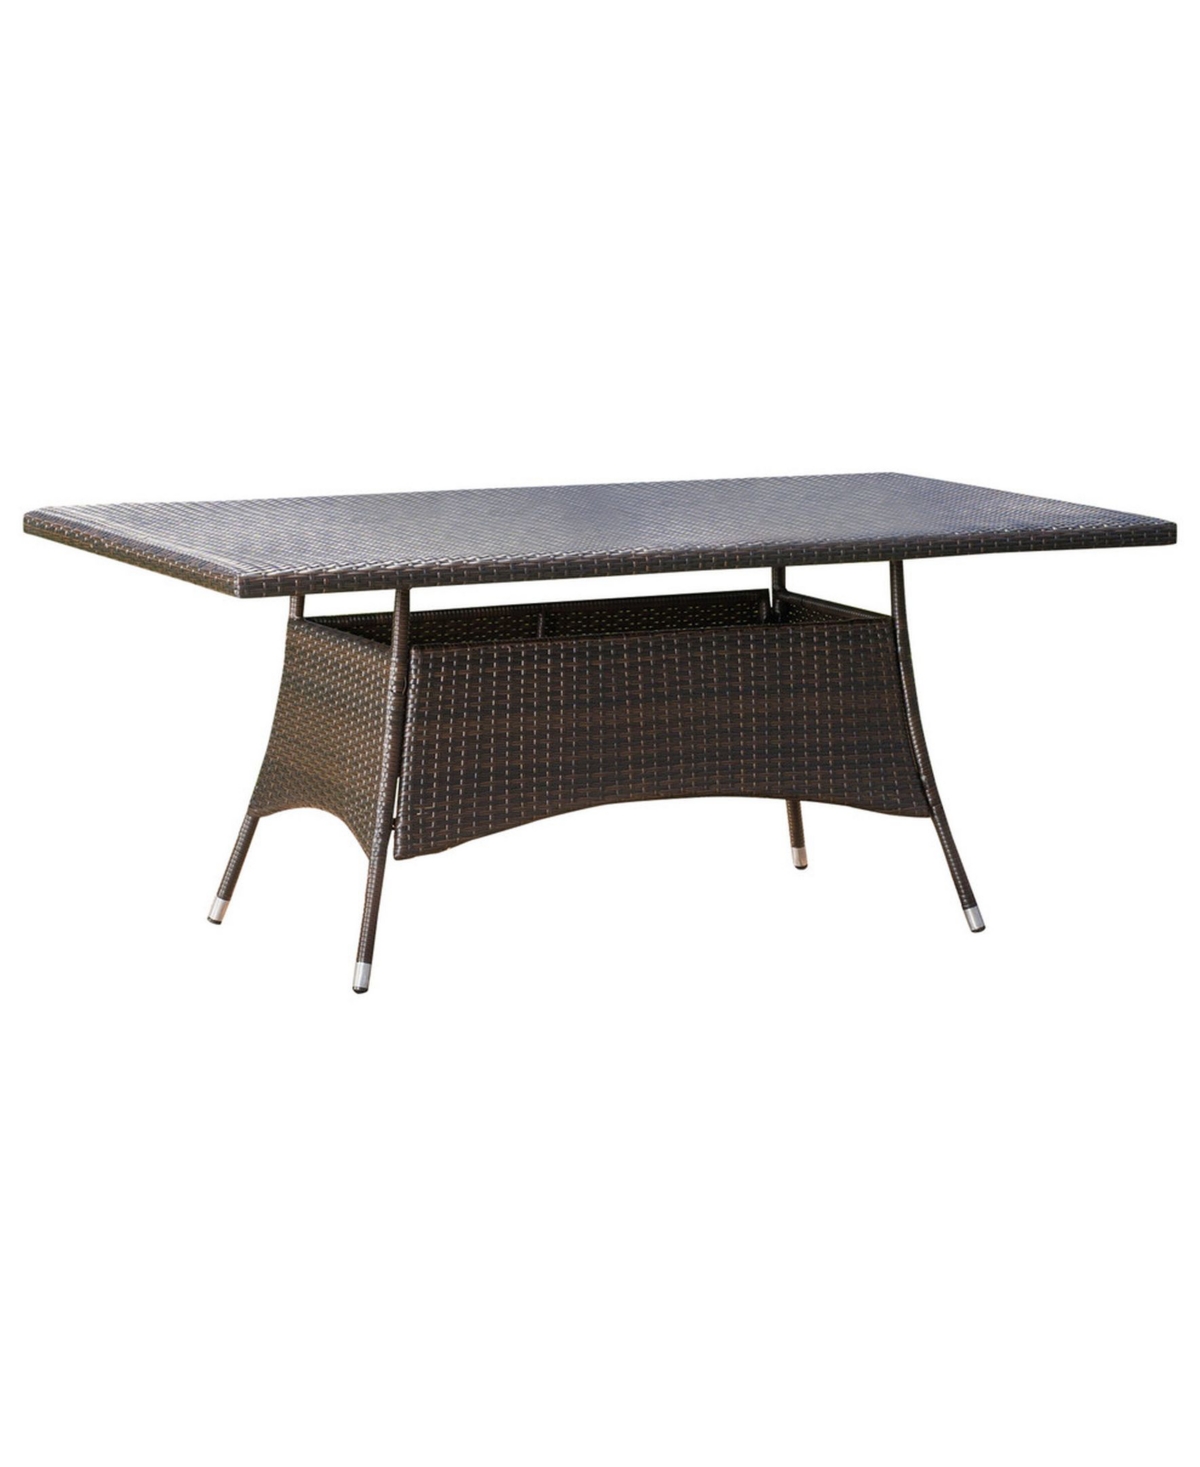 11052770 Noble House Corsica Rectangle Dining Table sku 11052770